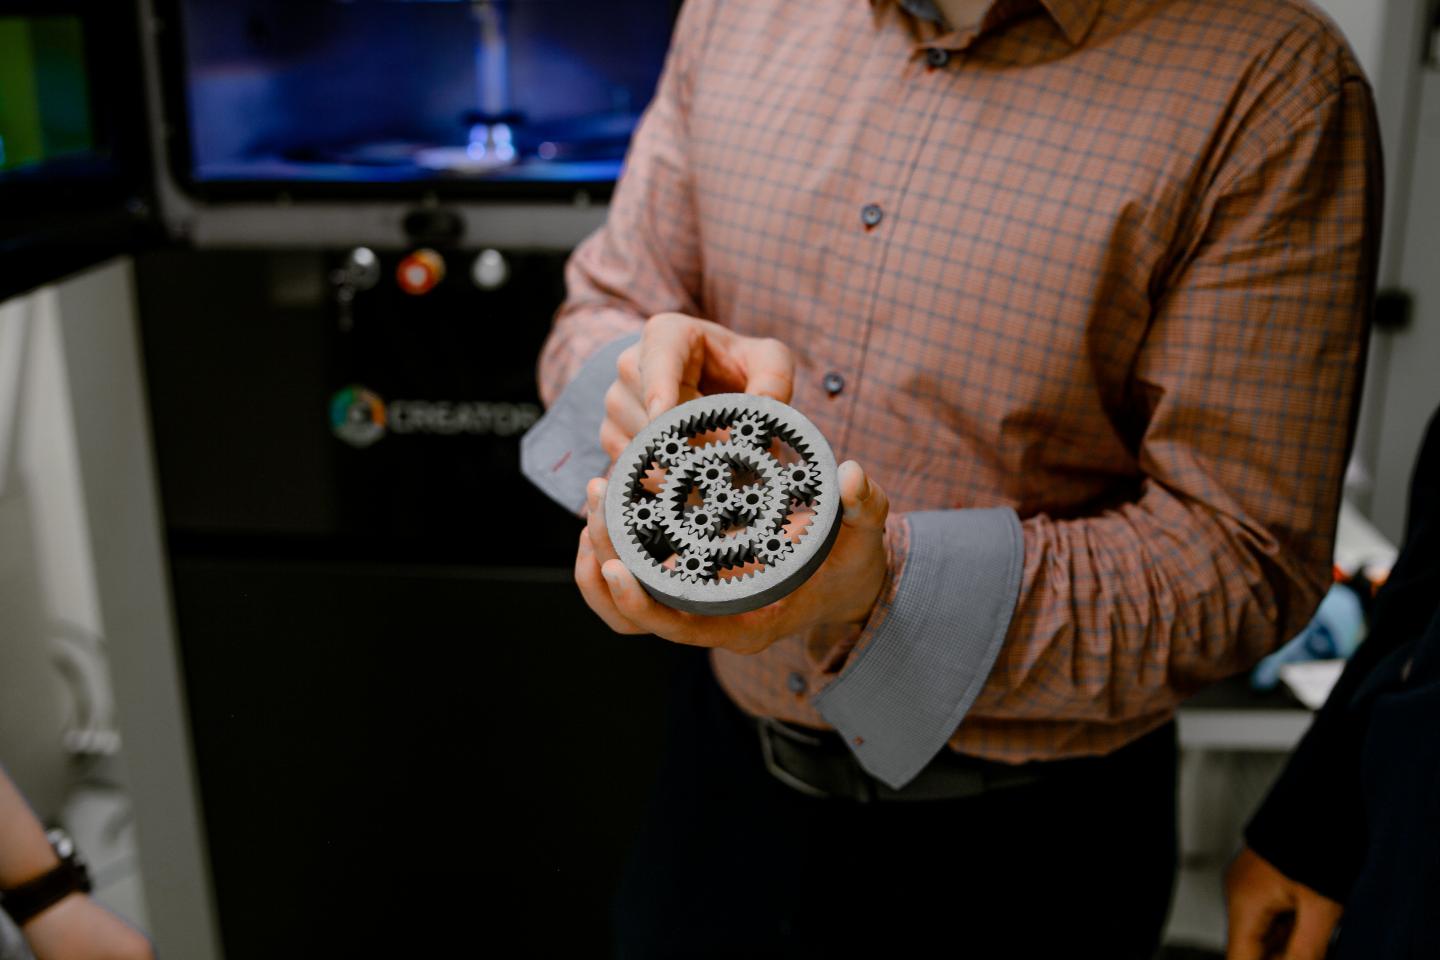 Planetary chevron gear was print with a 3D printer.